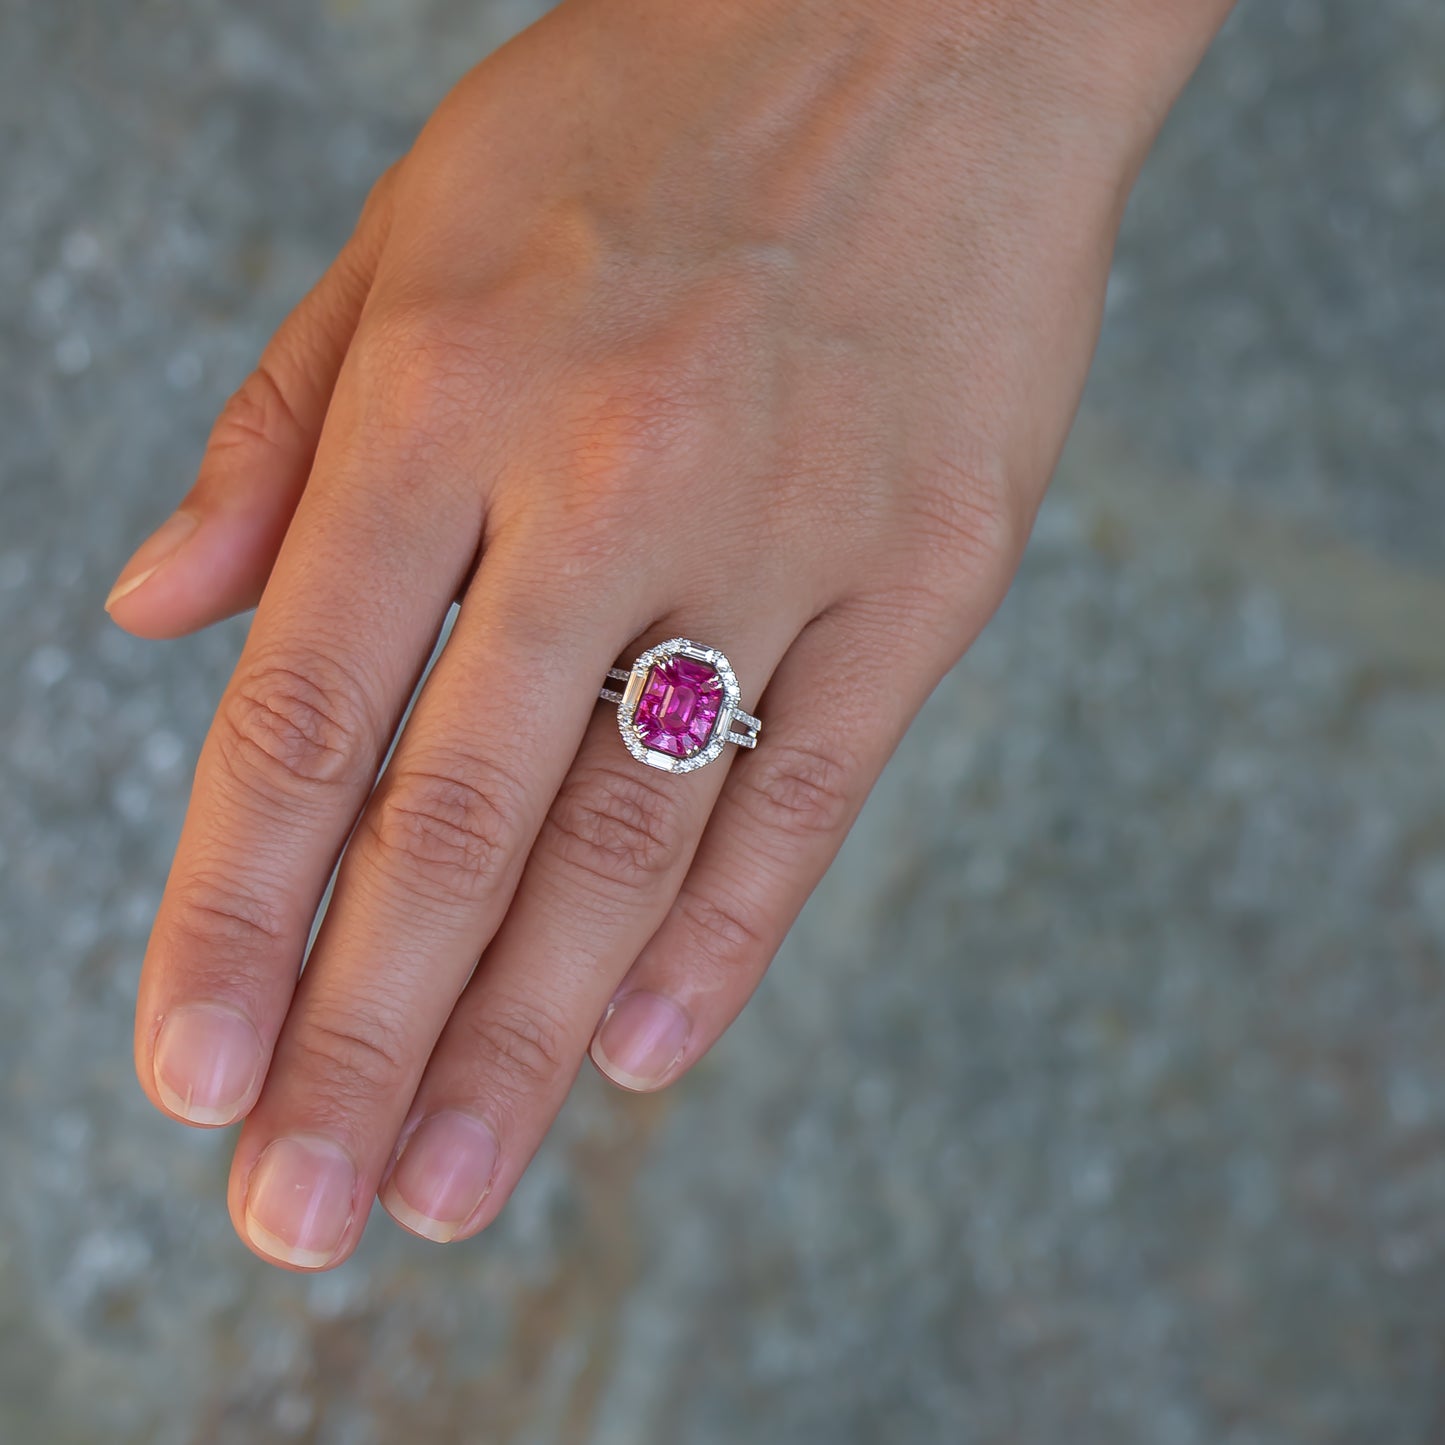 Hot Pink Sapphires 1.85 Carats Ring With Diamonds 0.98 Carats from Lux USA on hand photo